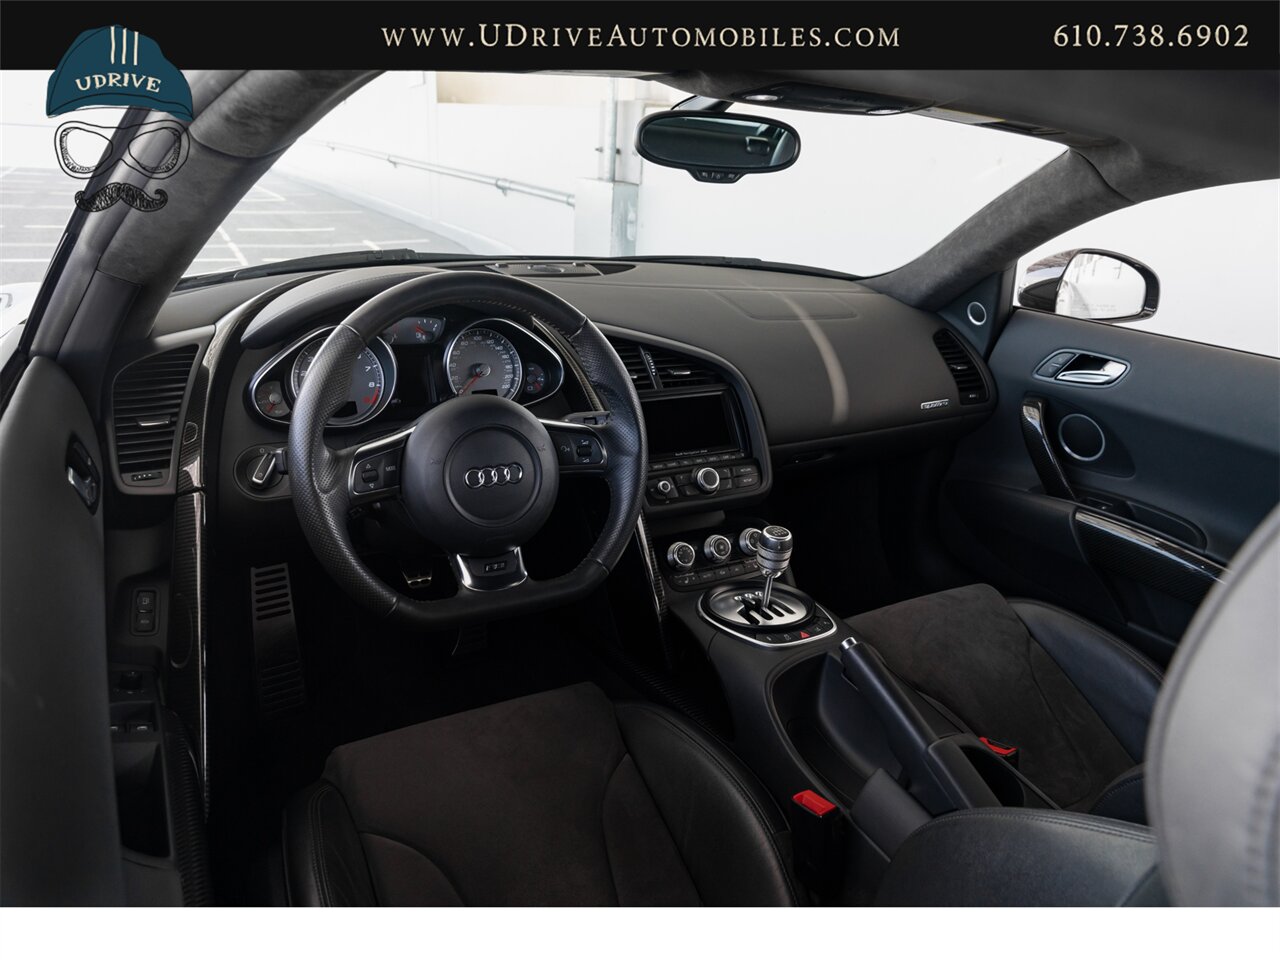 2012 Audi R8 4.2 Quattro  6 Speed Manual 1 Owner Service History - Photo 5 - West Chester, PA 19382